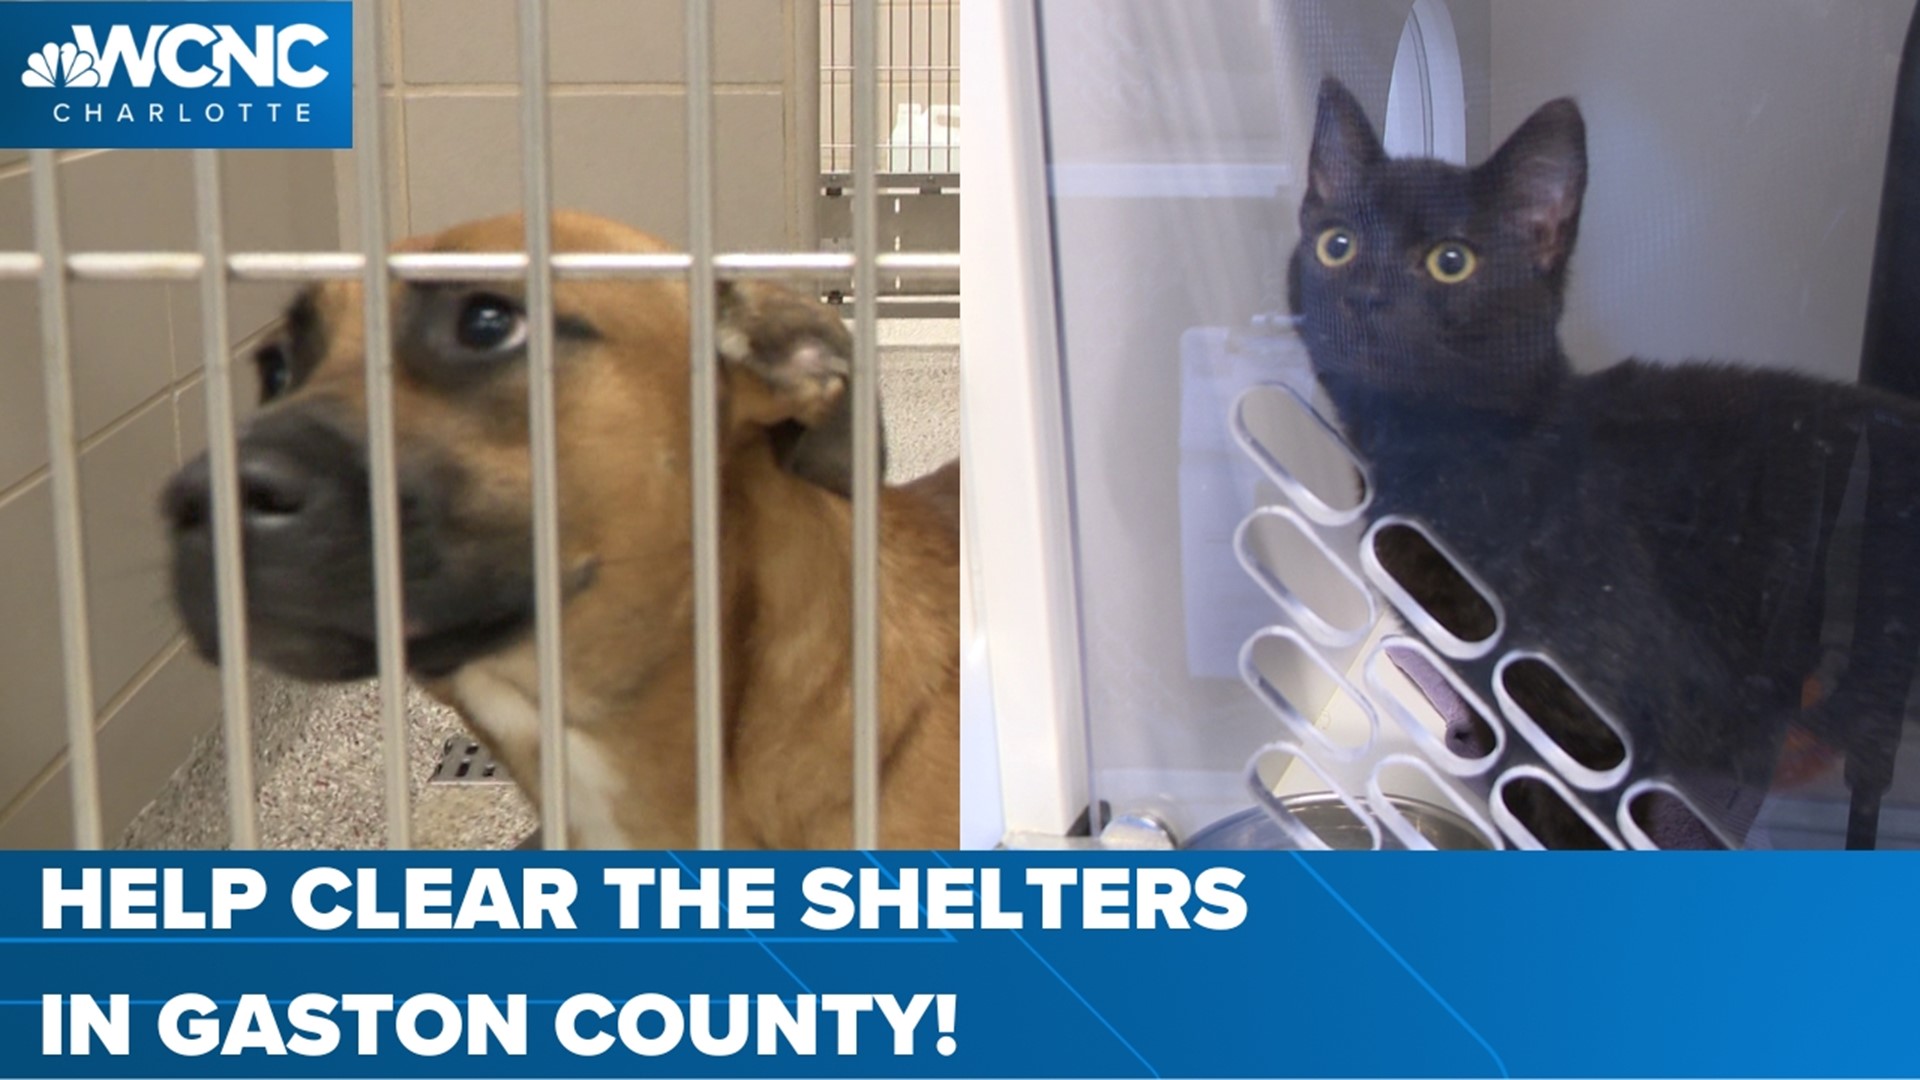 Our big "Clear the Shelters" event is this Saturday!